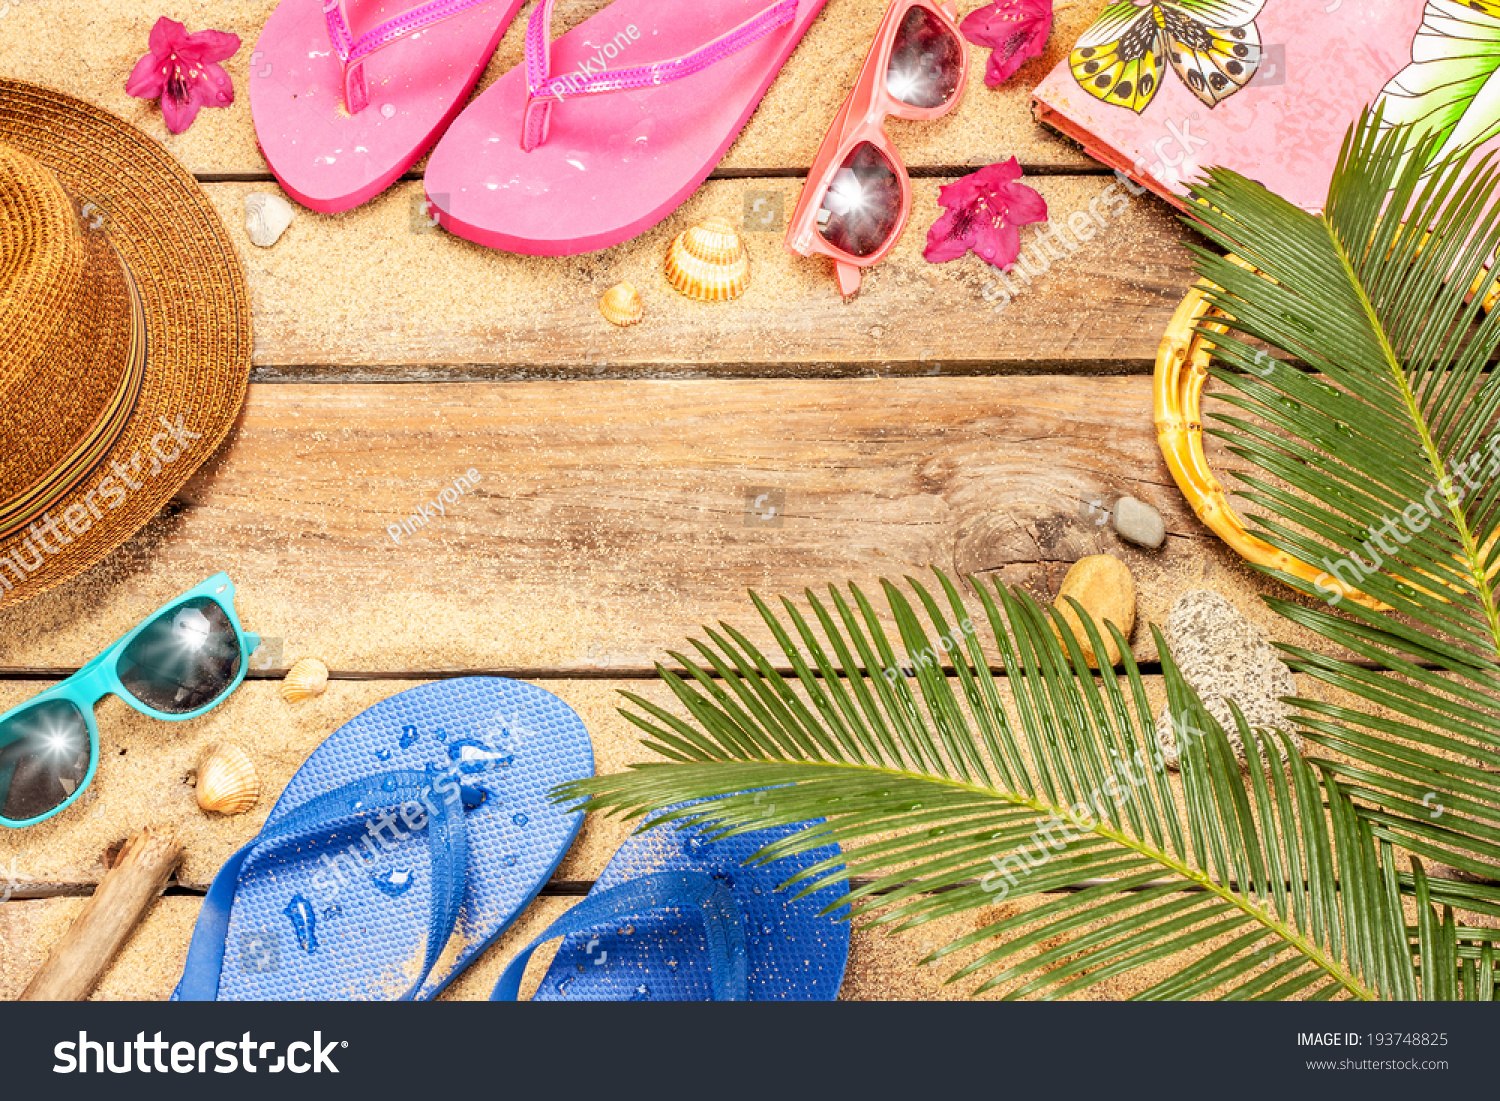 Holiday Vacation Tropical Beach Background Layout Stock Photo 193748825 ...